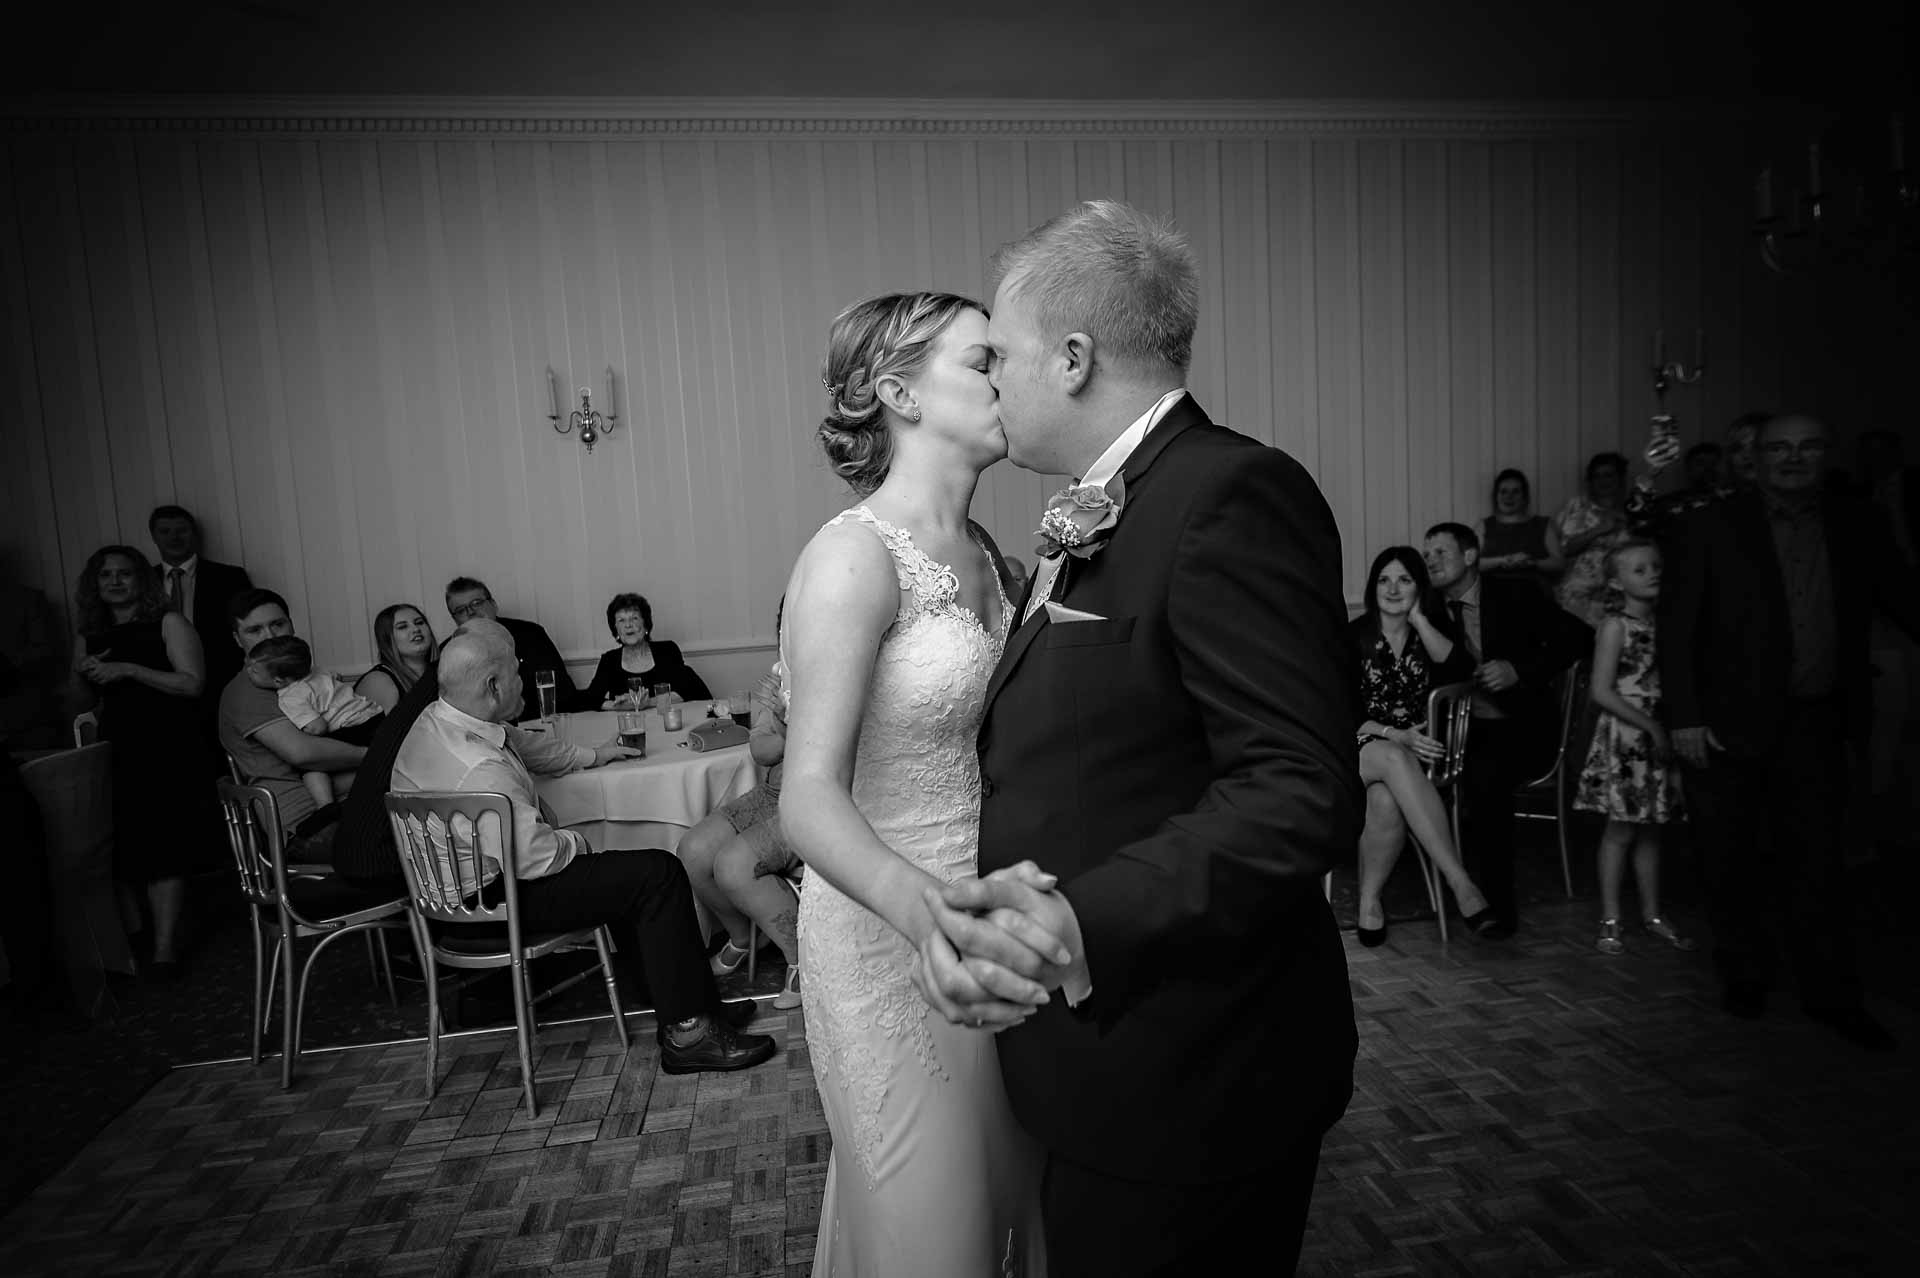 Bride and groom kissing during first dance